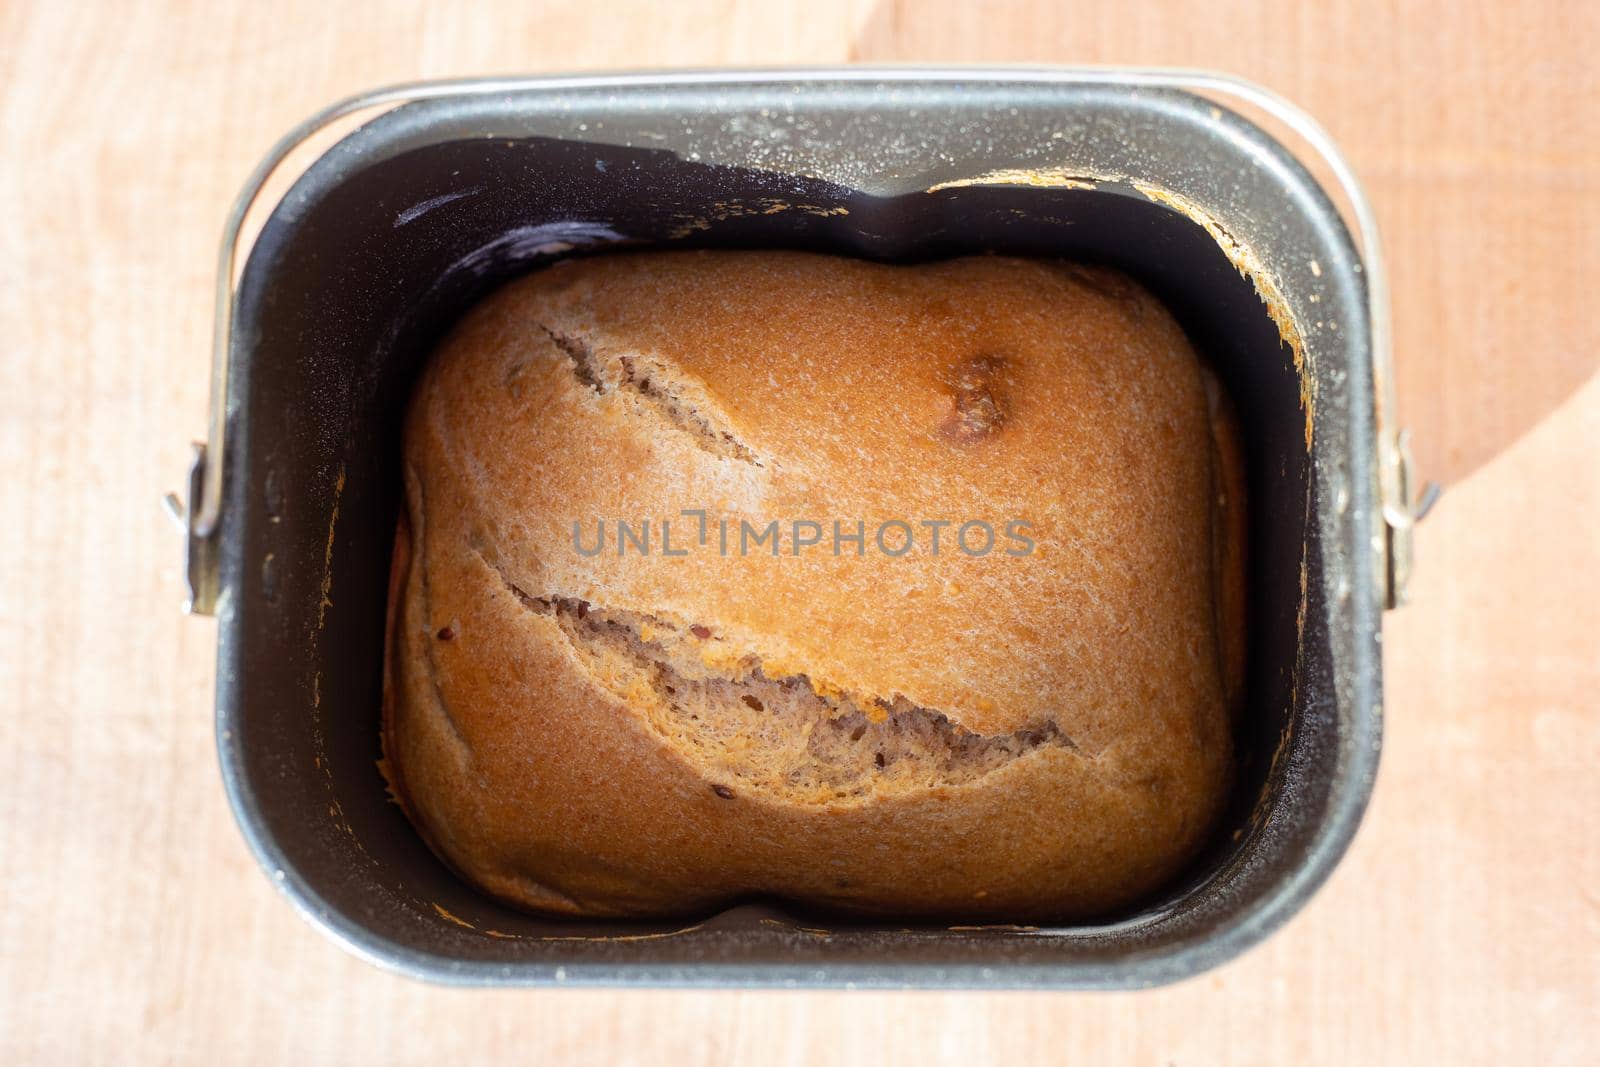 Homemade baked goods. A loaf of fresh bread in an electric bread maker.